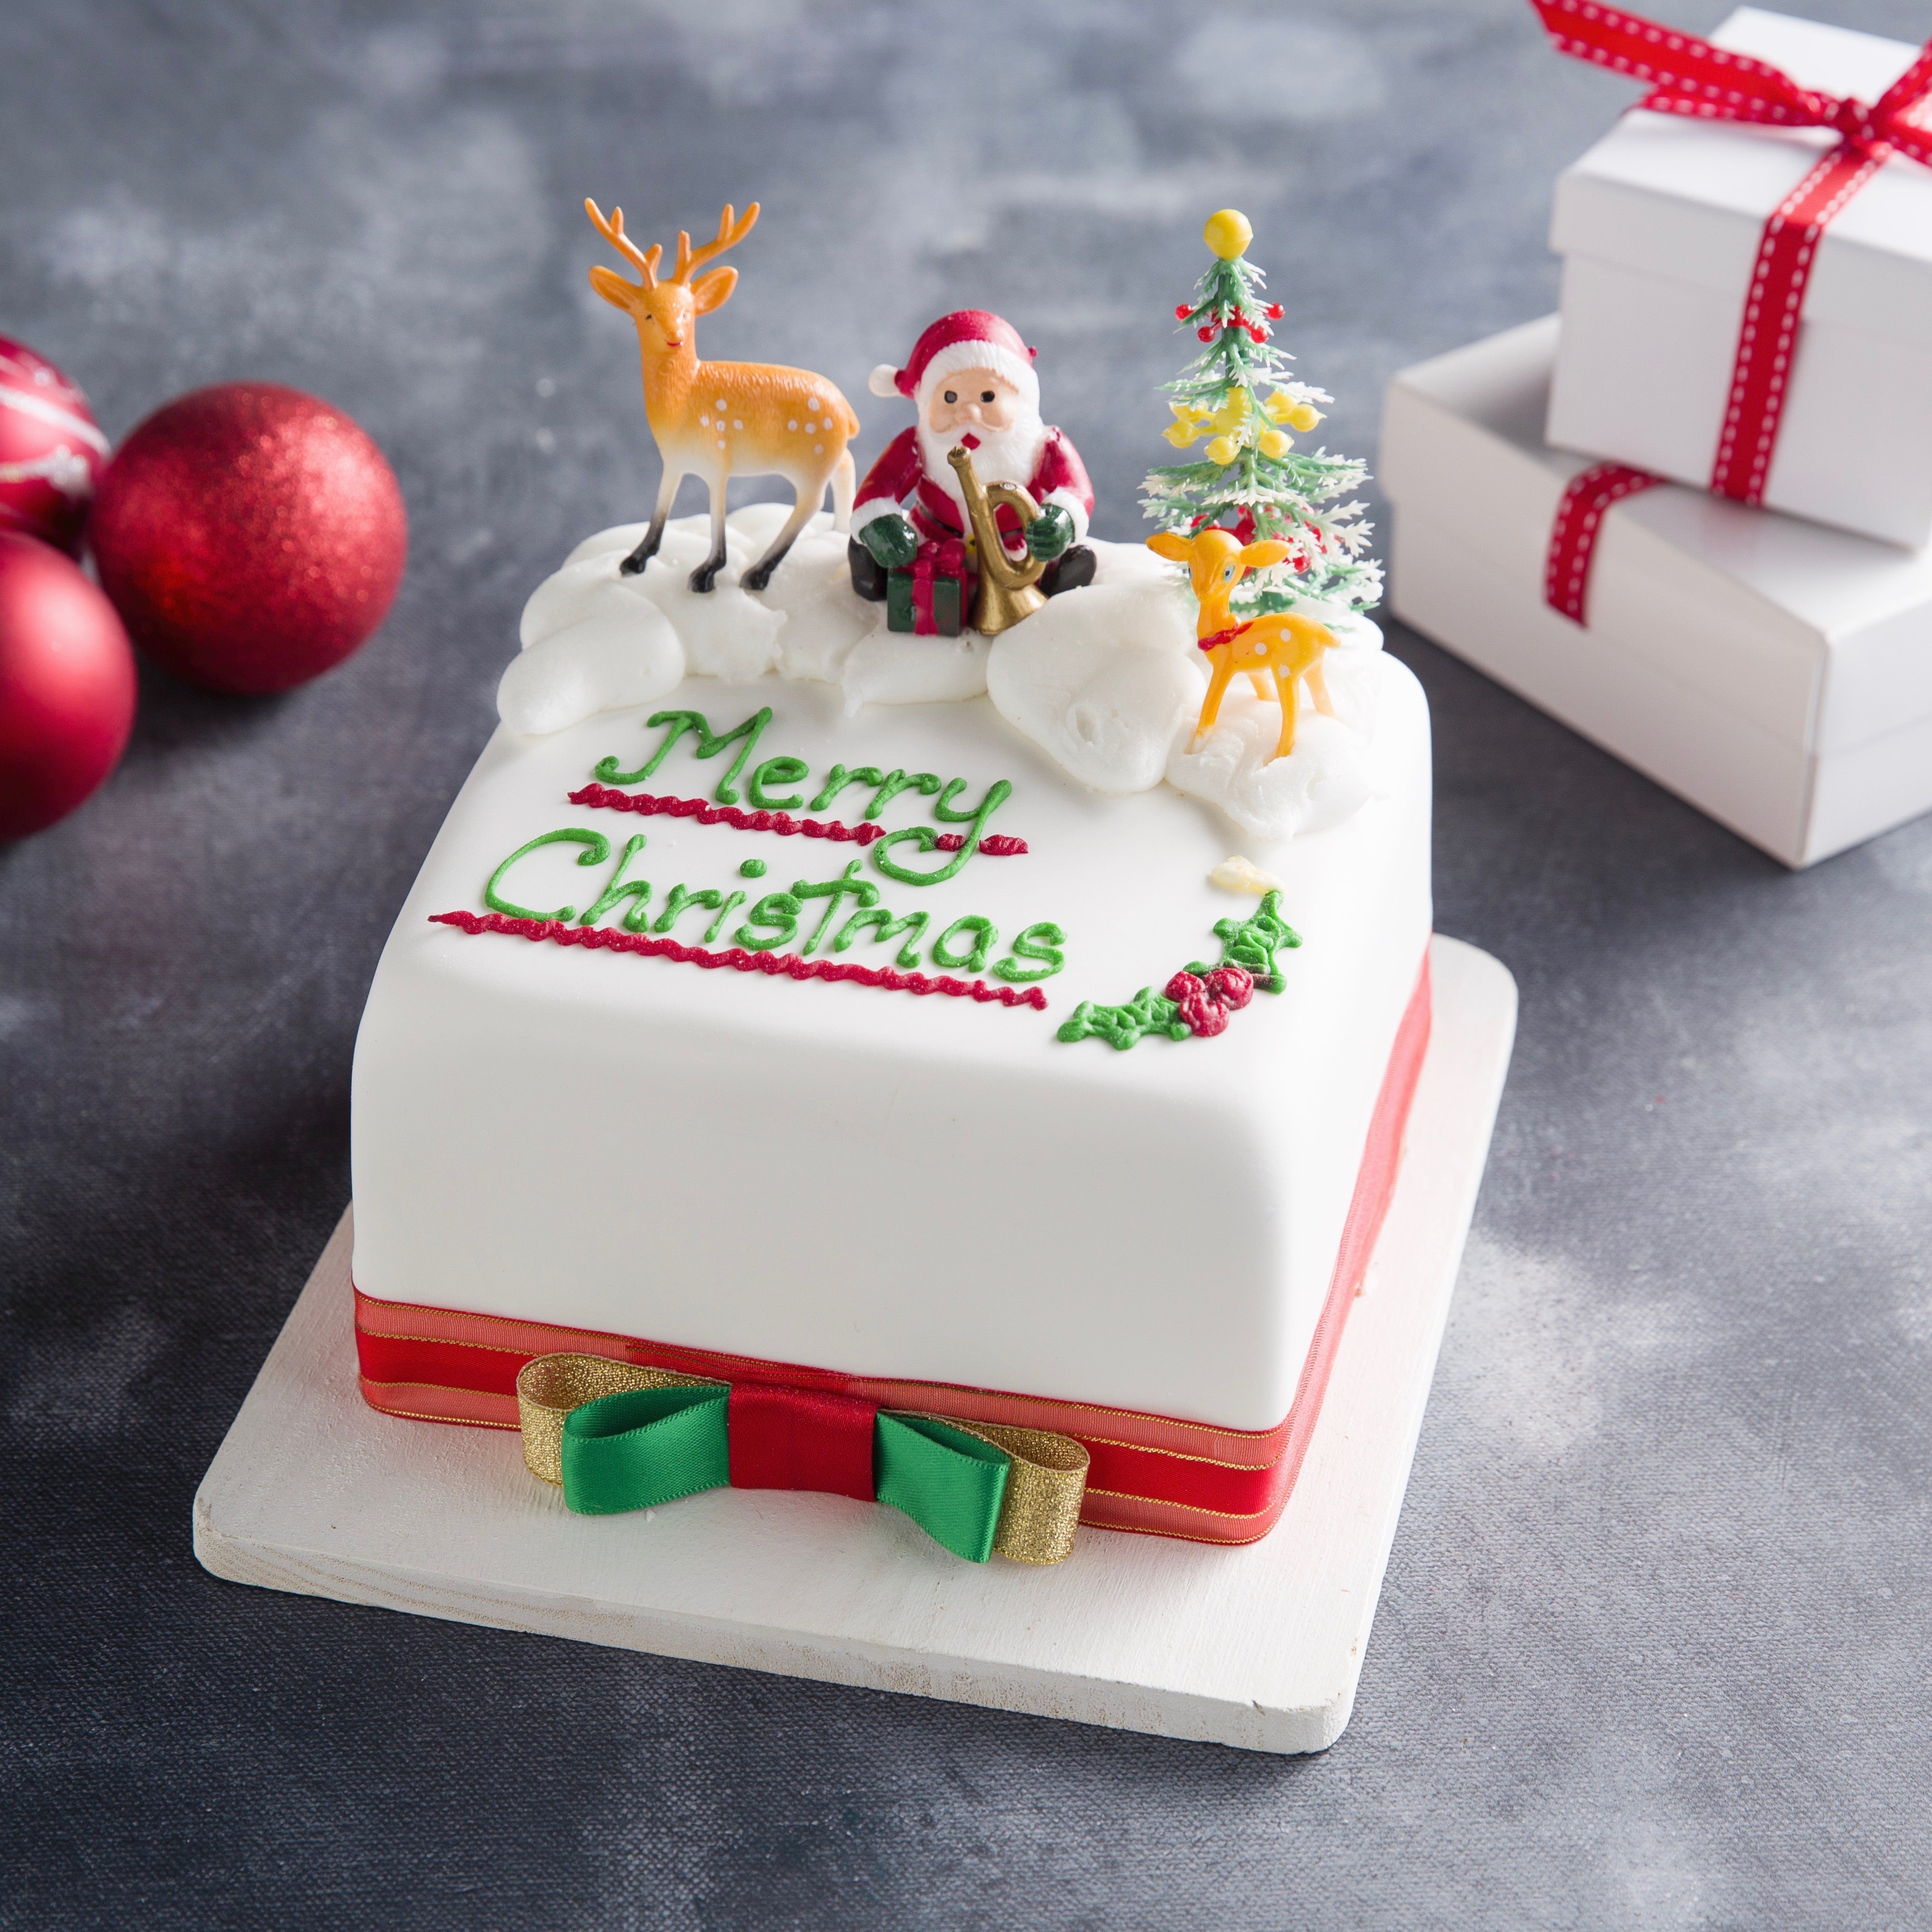 Decorated Christmas Fruit Cake | Poles Patisserie